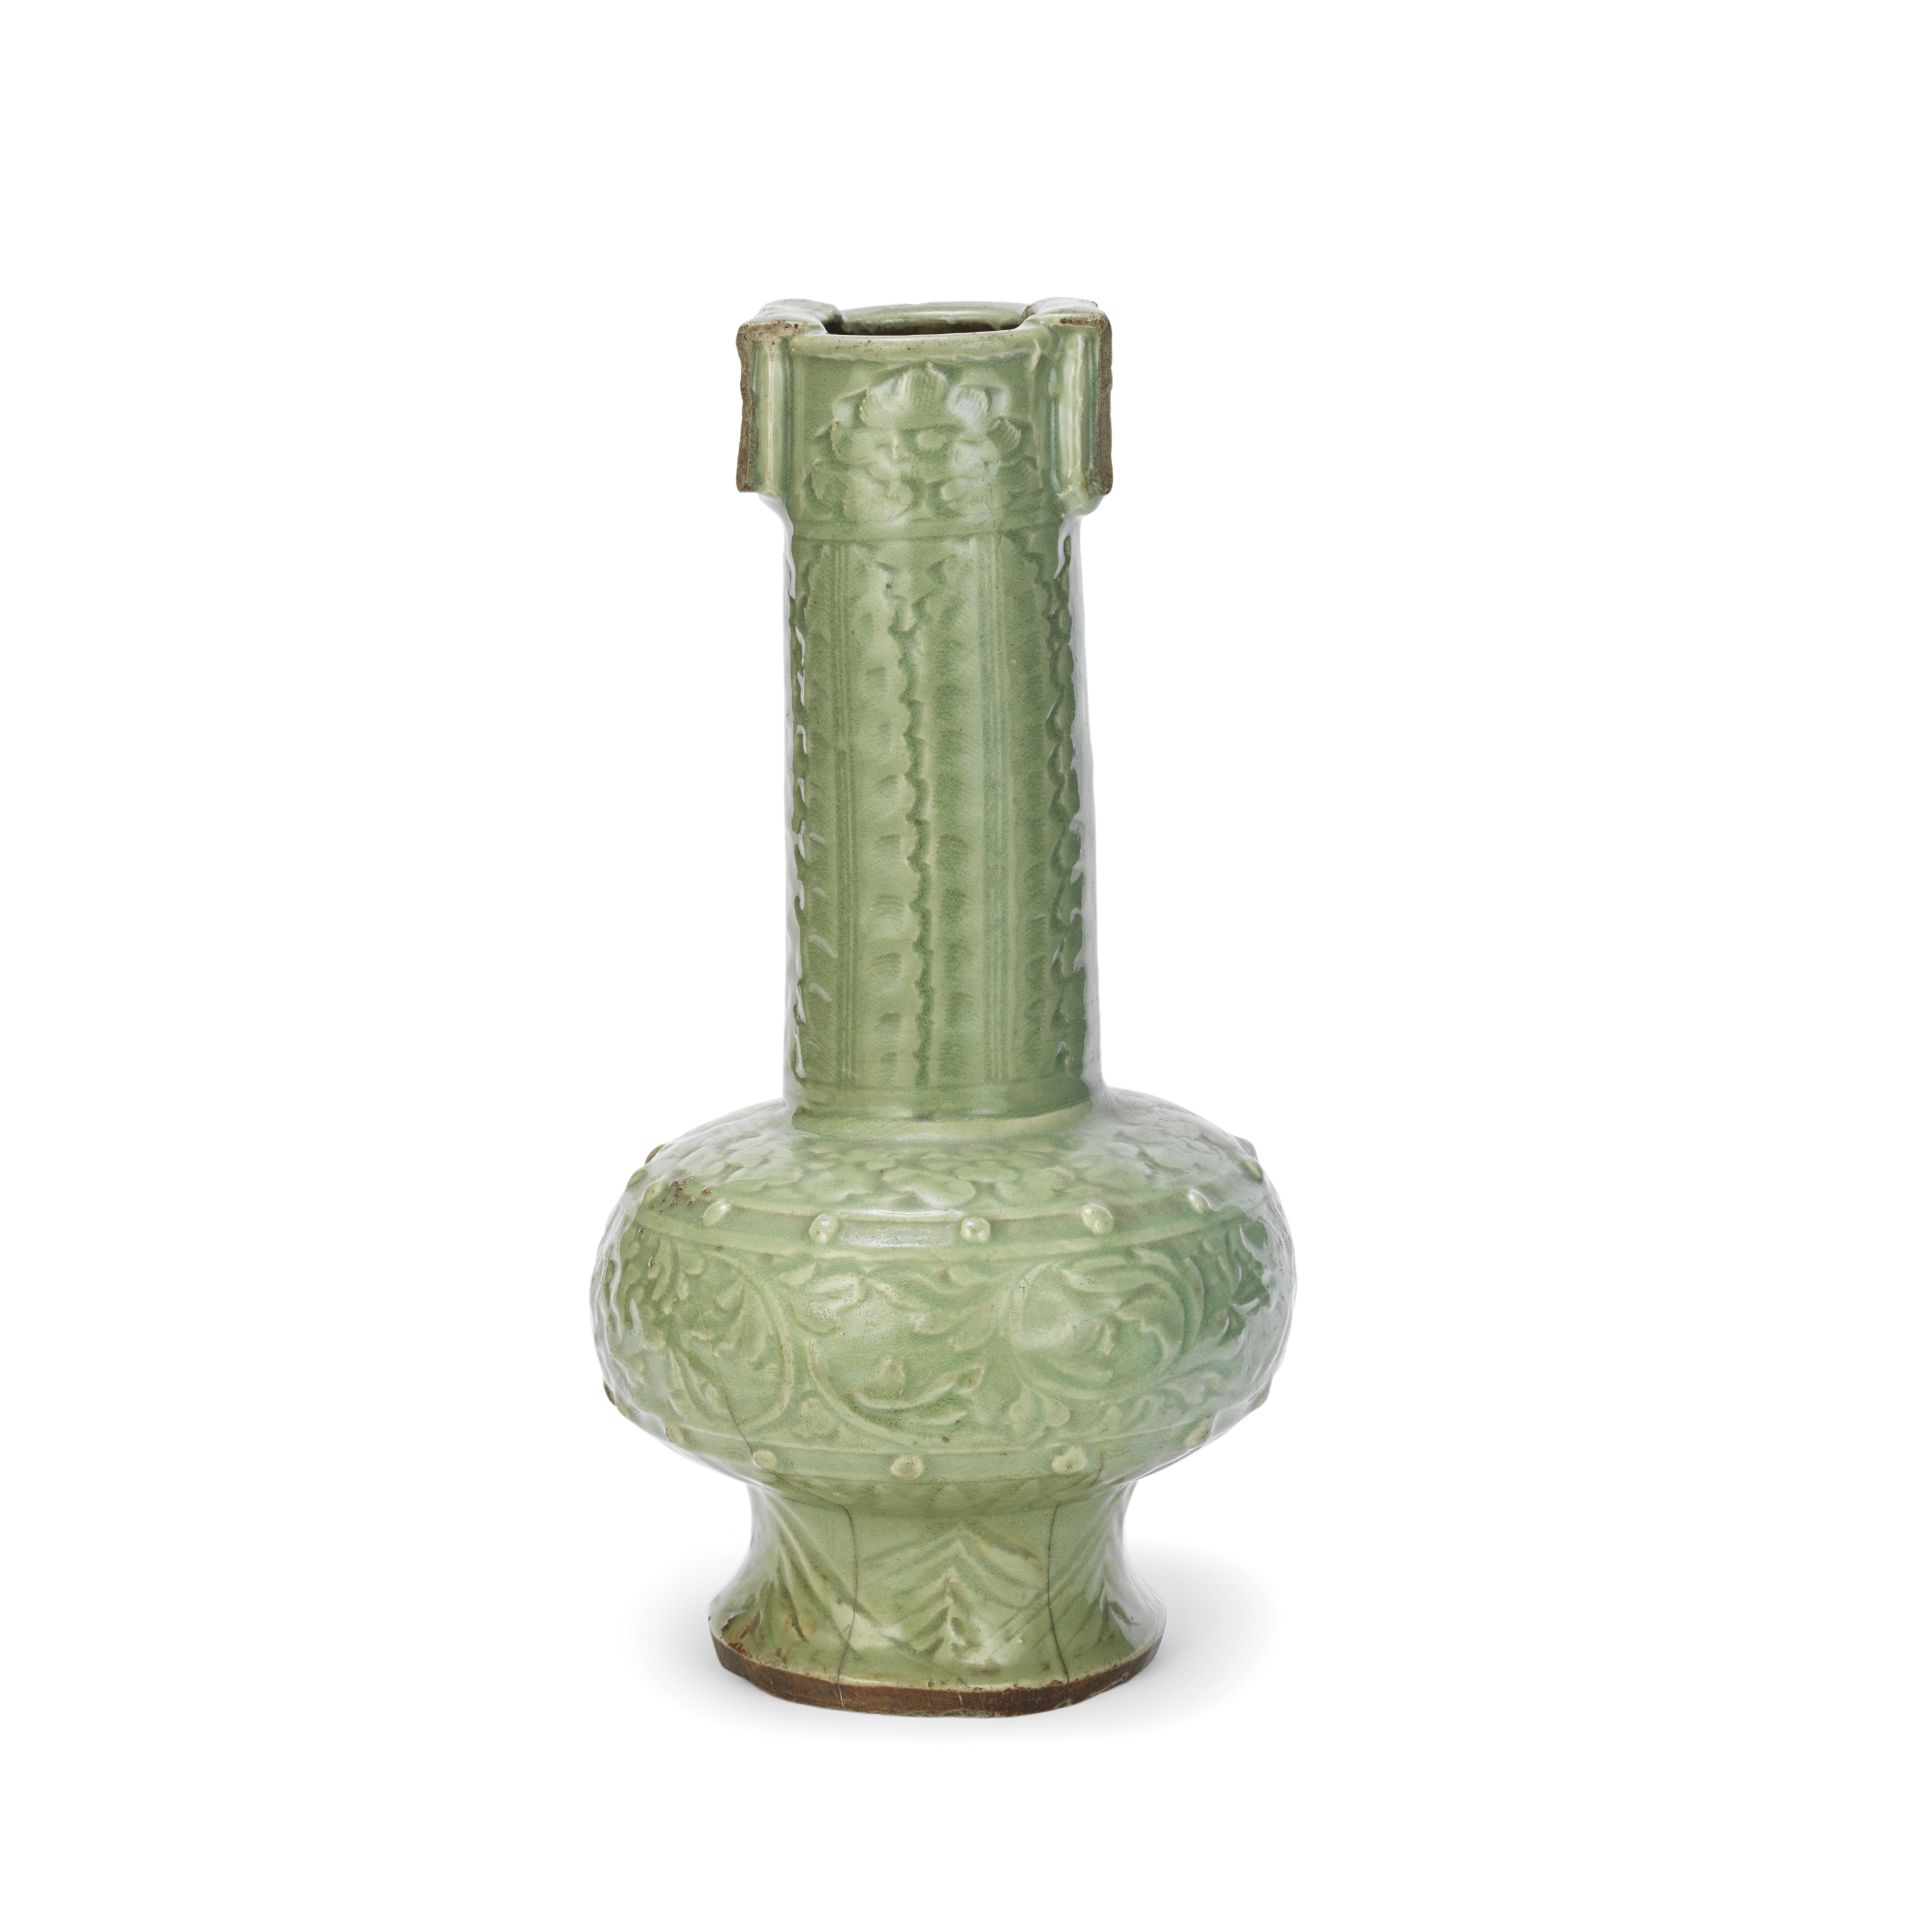 A VERY LARGE CARVED LONGQUAN CELADON ARROW VASE Ming Dynasty